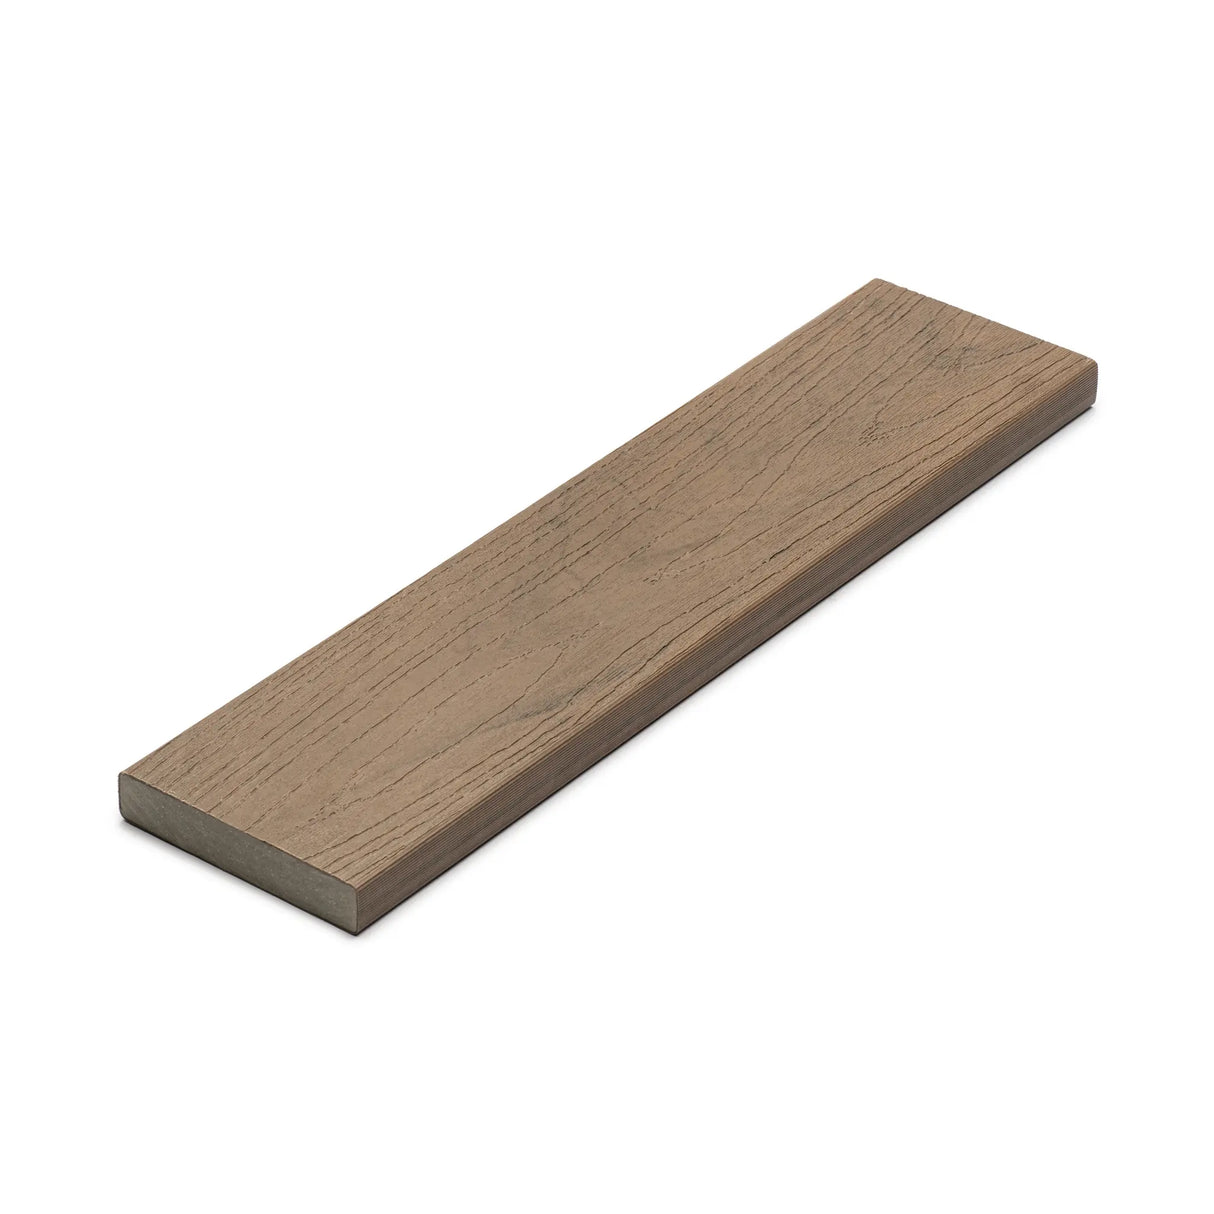 TruNorth® Enviroboard Composite Decking from $3.09/ft - ON SALE!